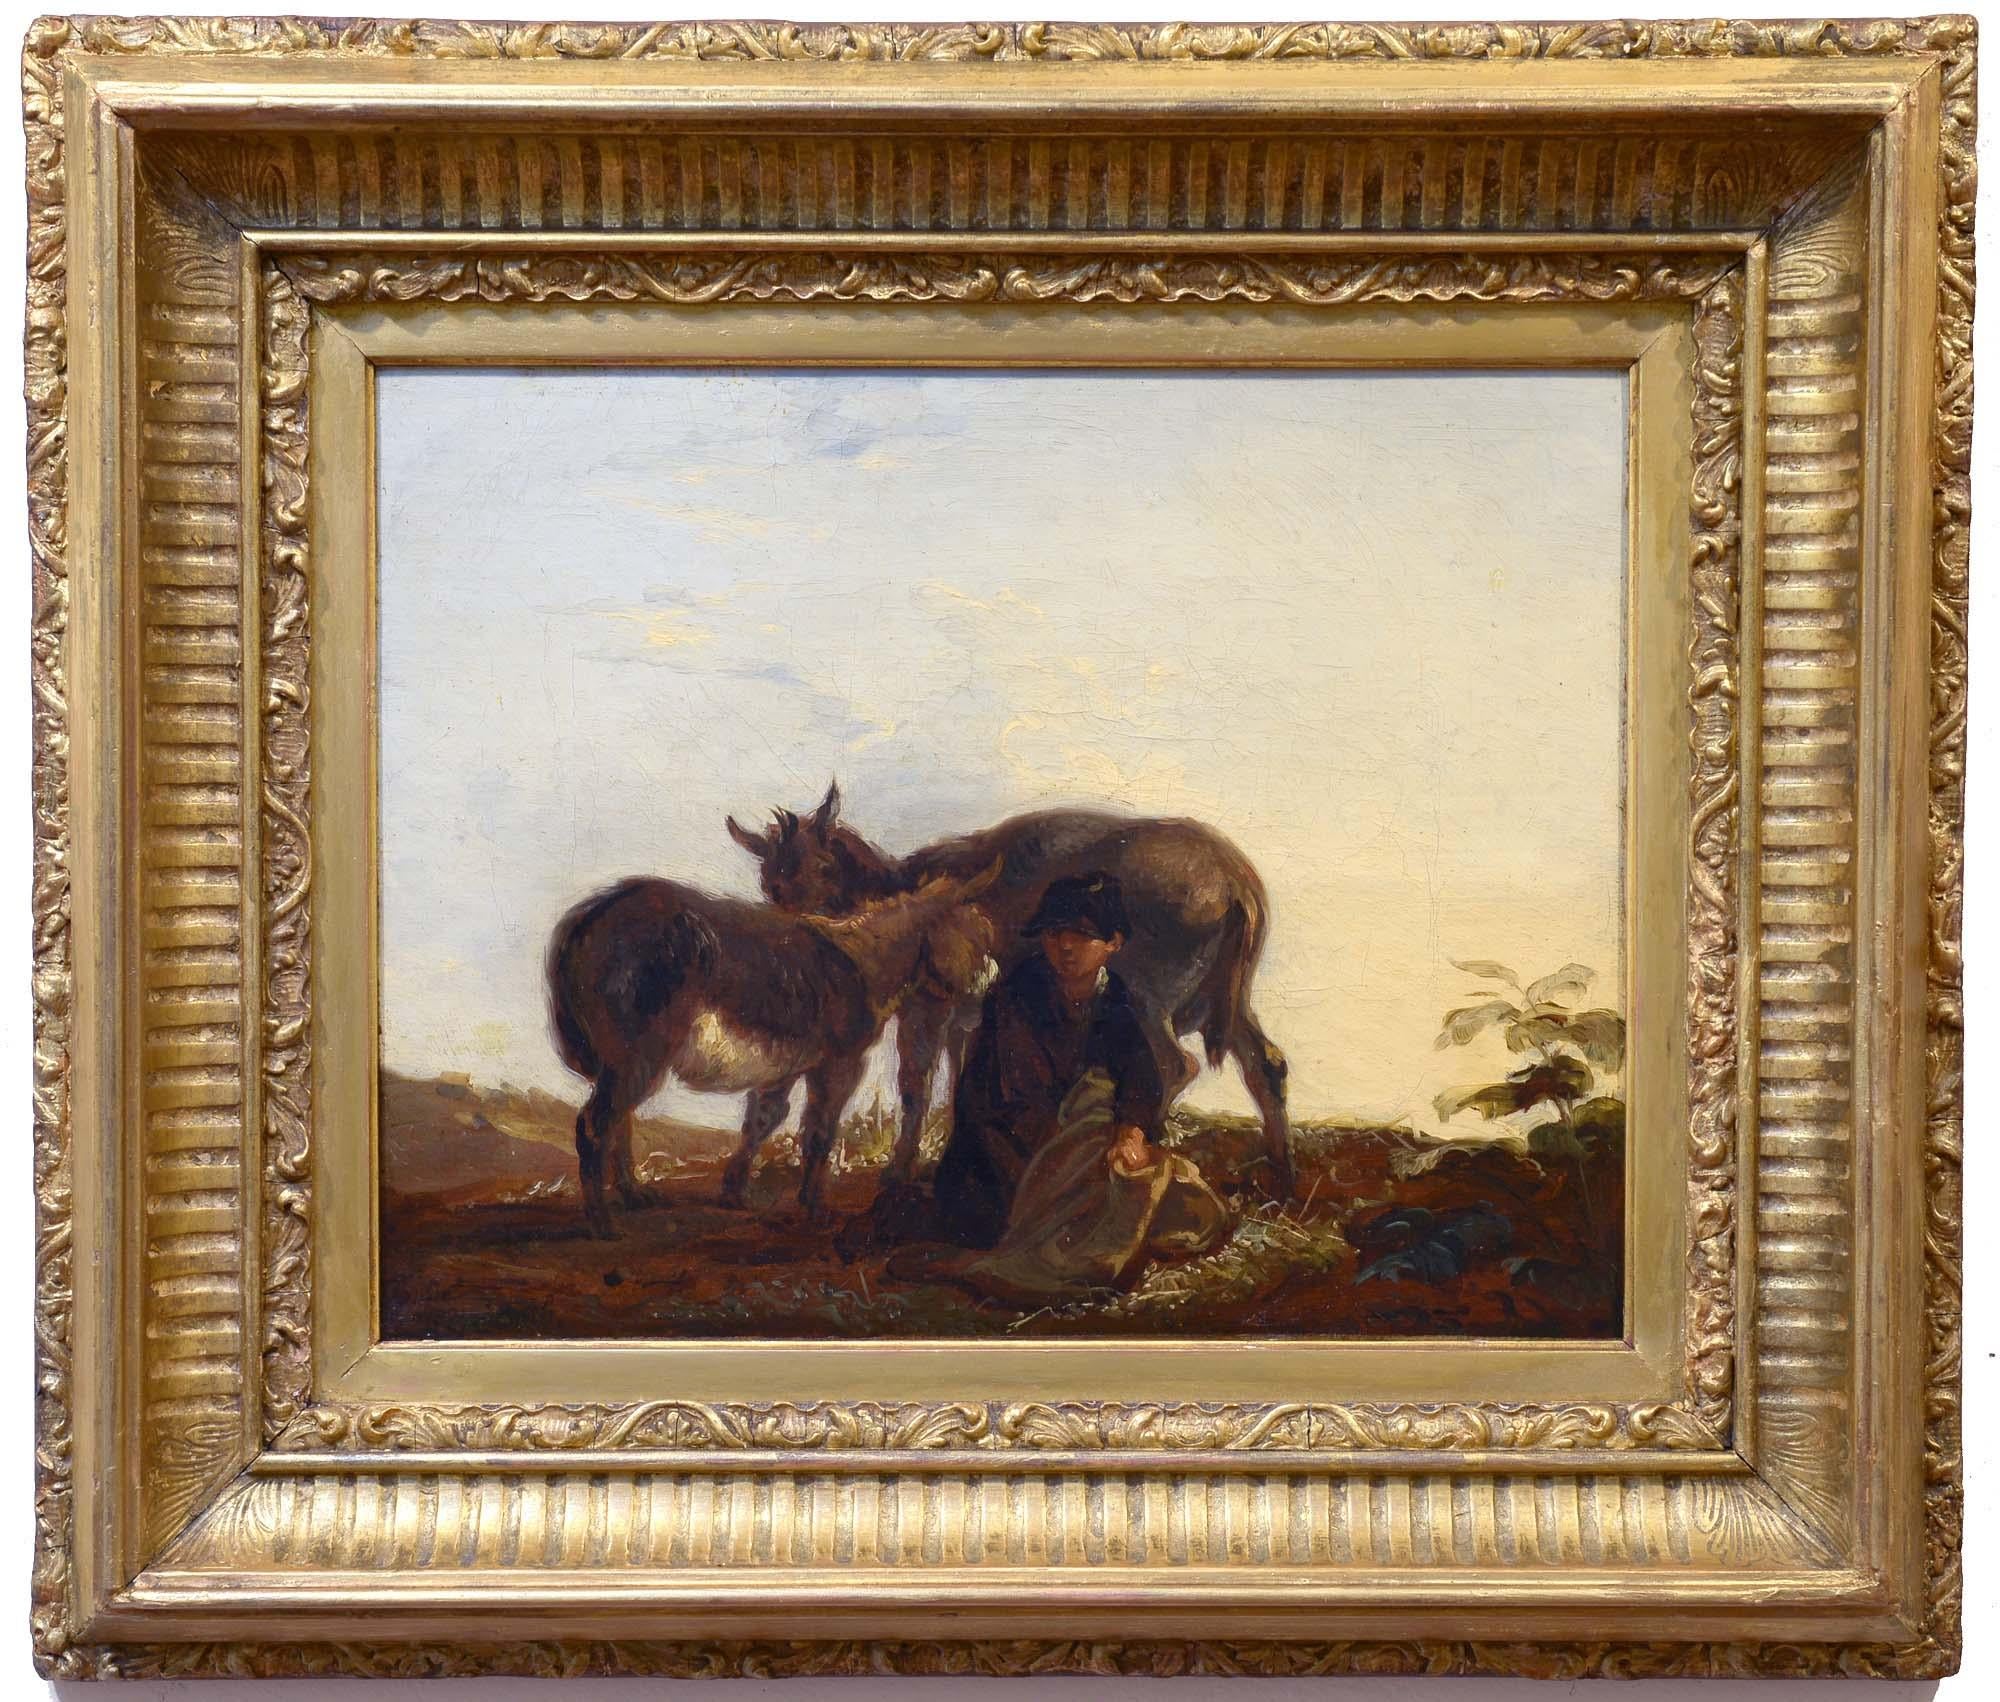 Day's End, Realist, Donkeys, Figure, Genre, Landscape, Tate, British Museum - Painting by Thomas Barker of Bath